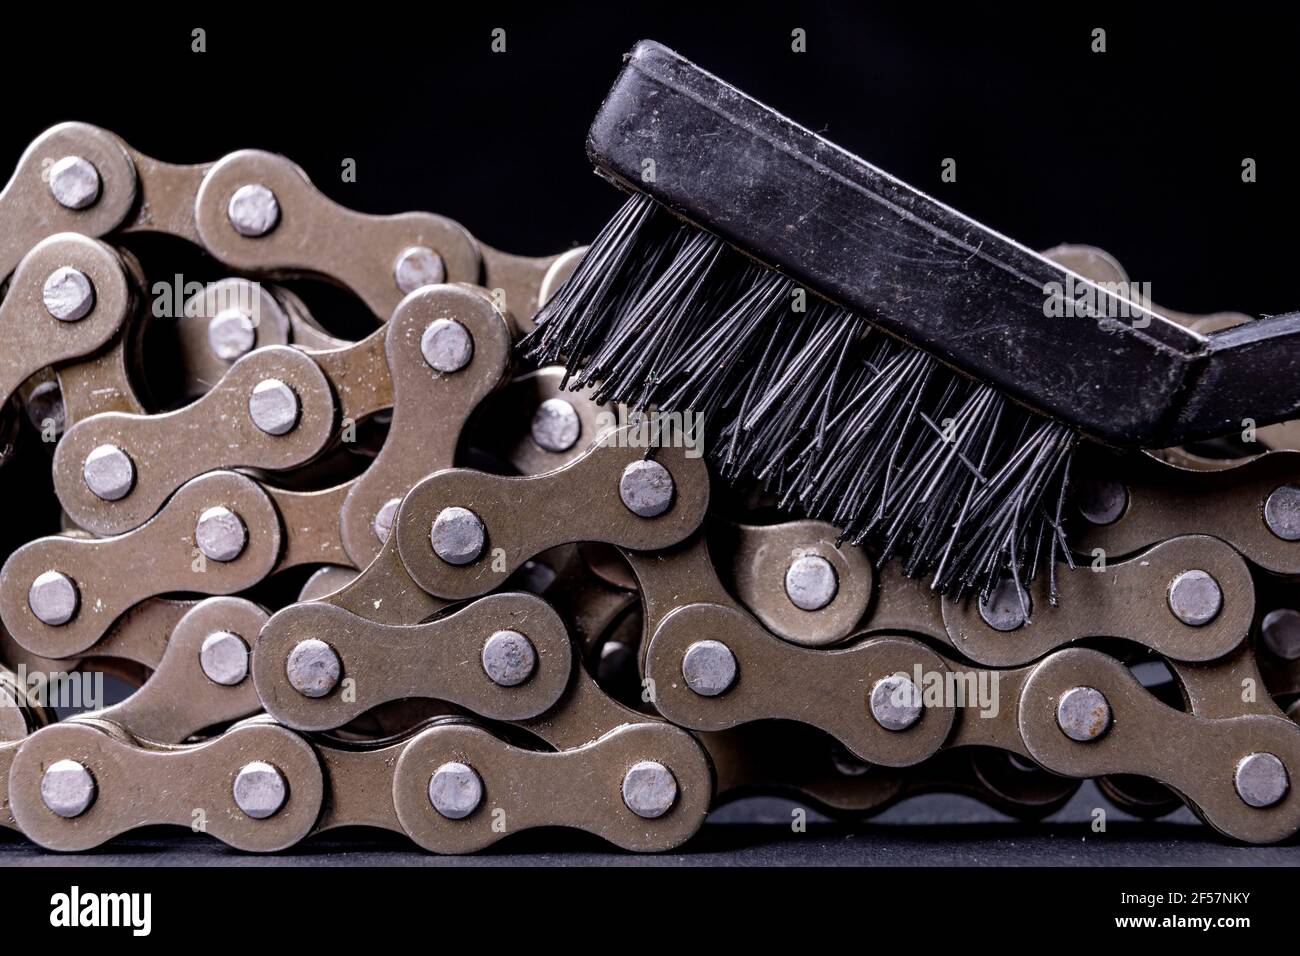 Cleaning the bicycle chain with a plastic brush. Maintenance work carried out in a bicycle workshop. Dark background. Stock Photo